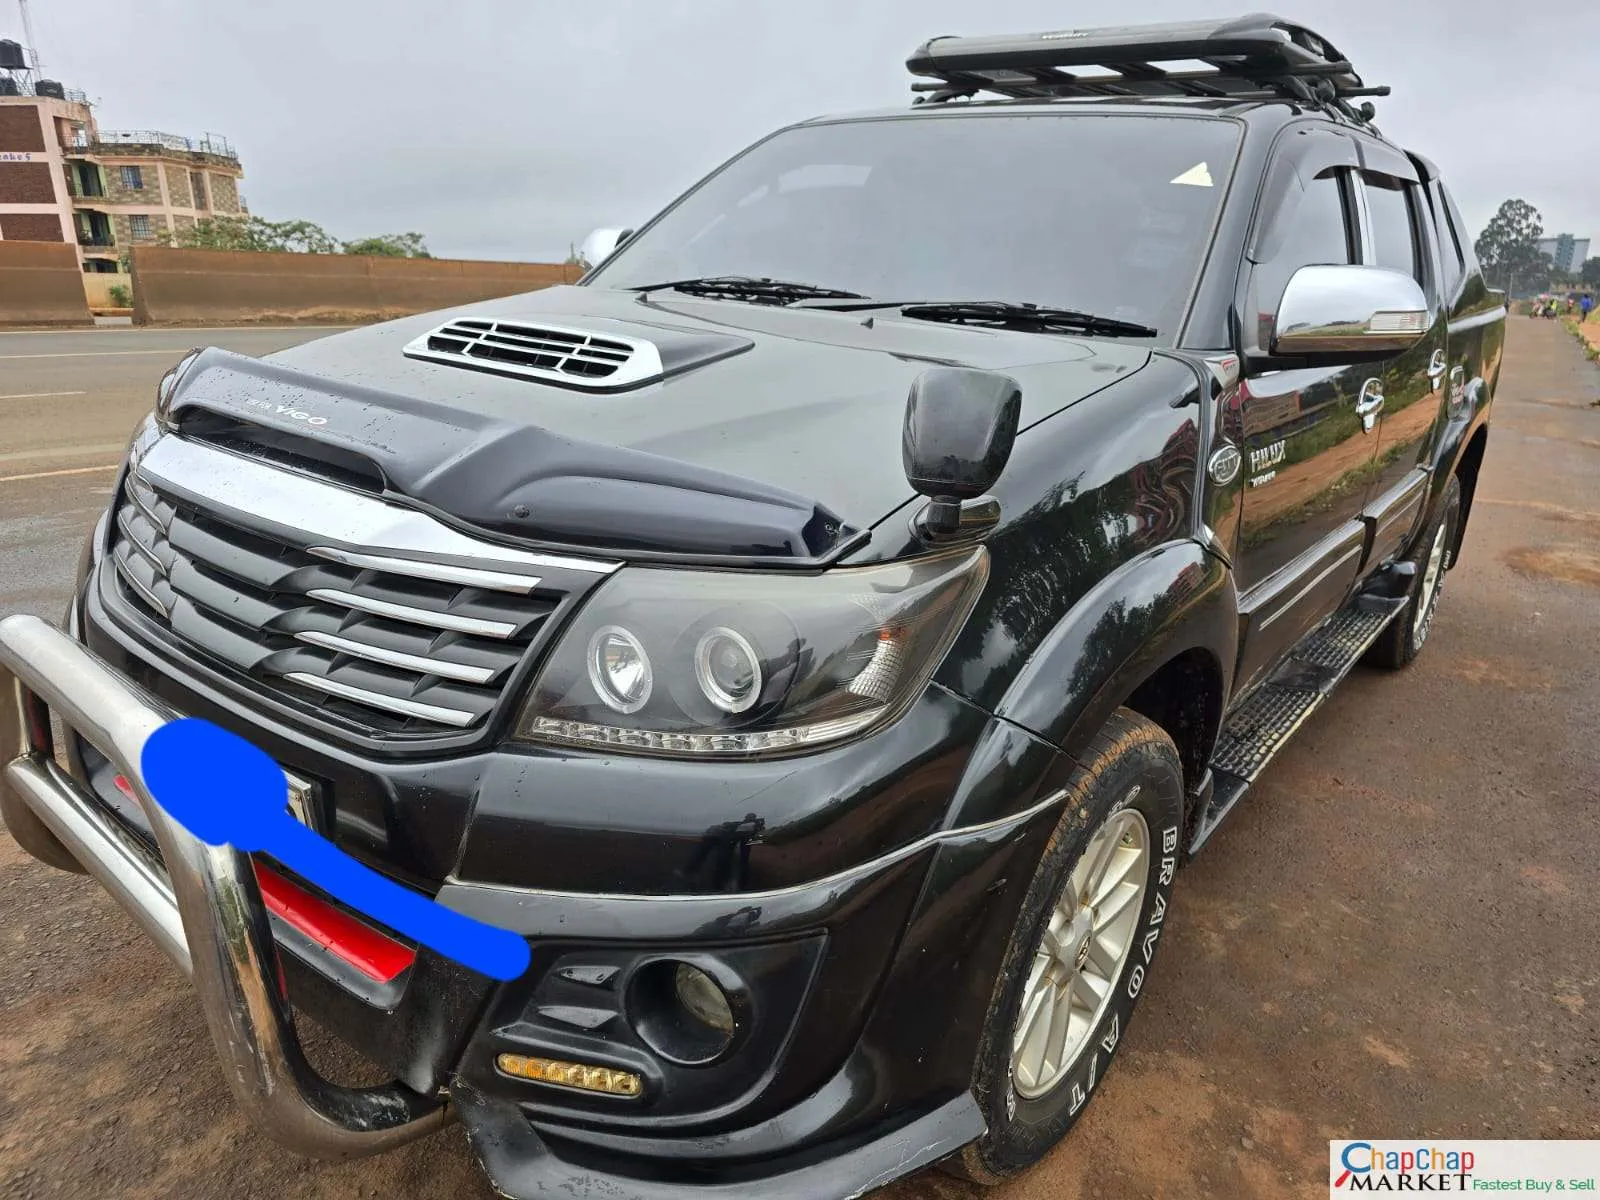 Cars Cars For Sale FOR SALE-Toyota Hilux Double cab You Pay 30% Deposit trade in OK hire purchase installments 5